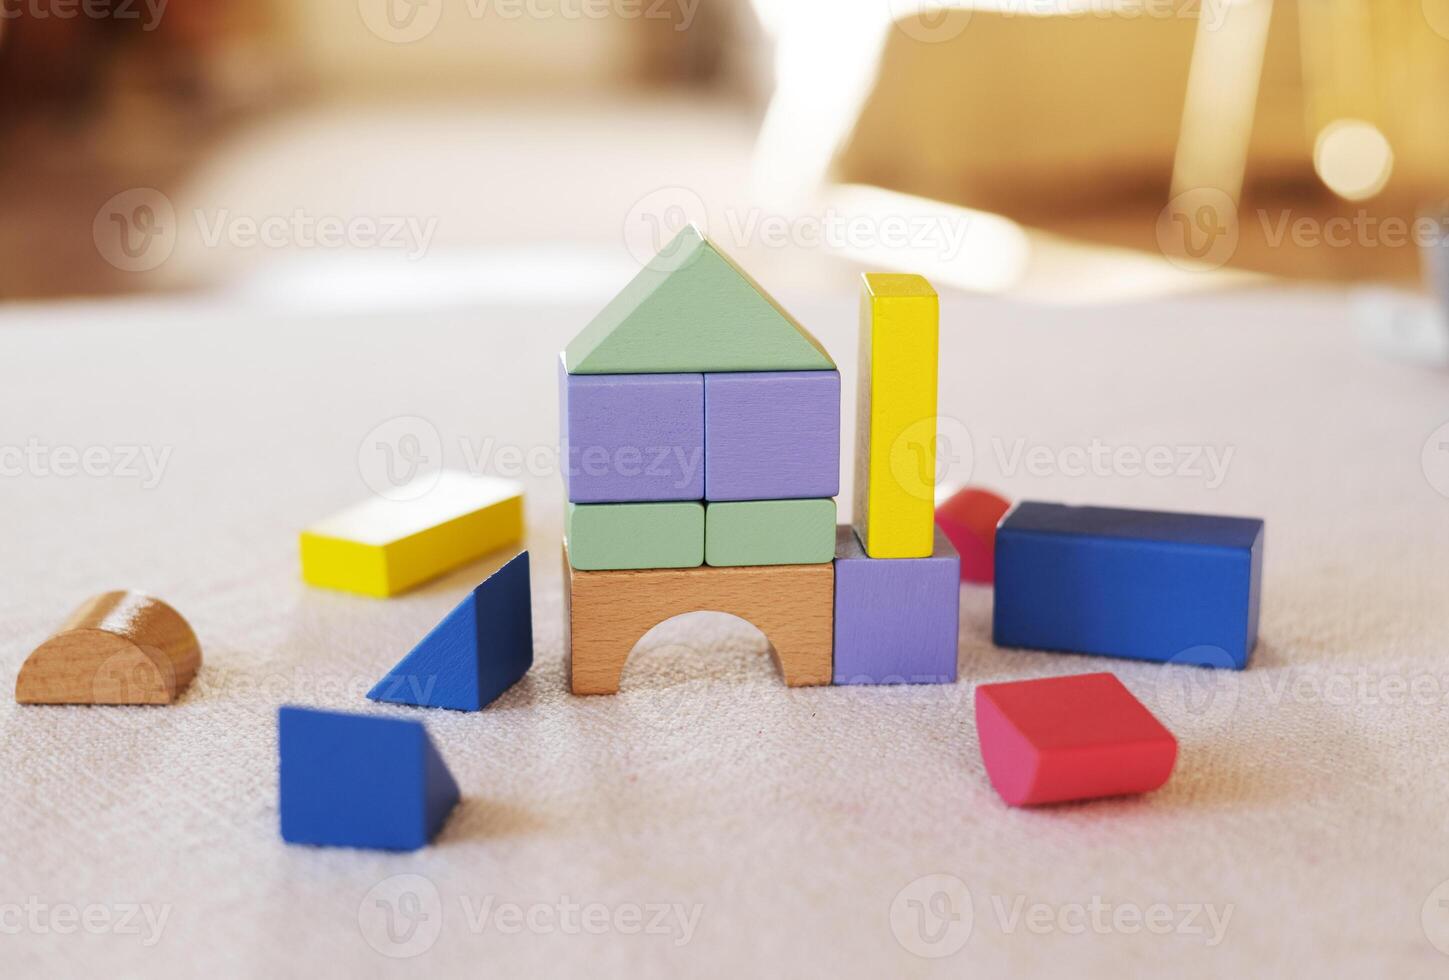 Colorful wooden blocks on home table. Creativity toys. Children building blocks. Geometric shapes - circle, triangle, square, rectangle. The concept of logical thinking. photo